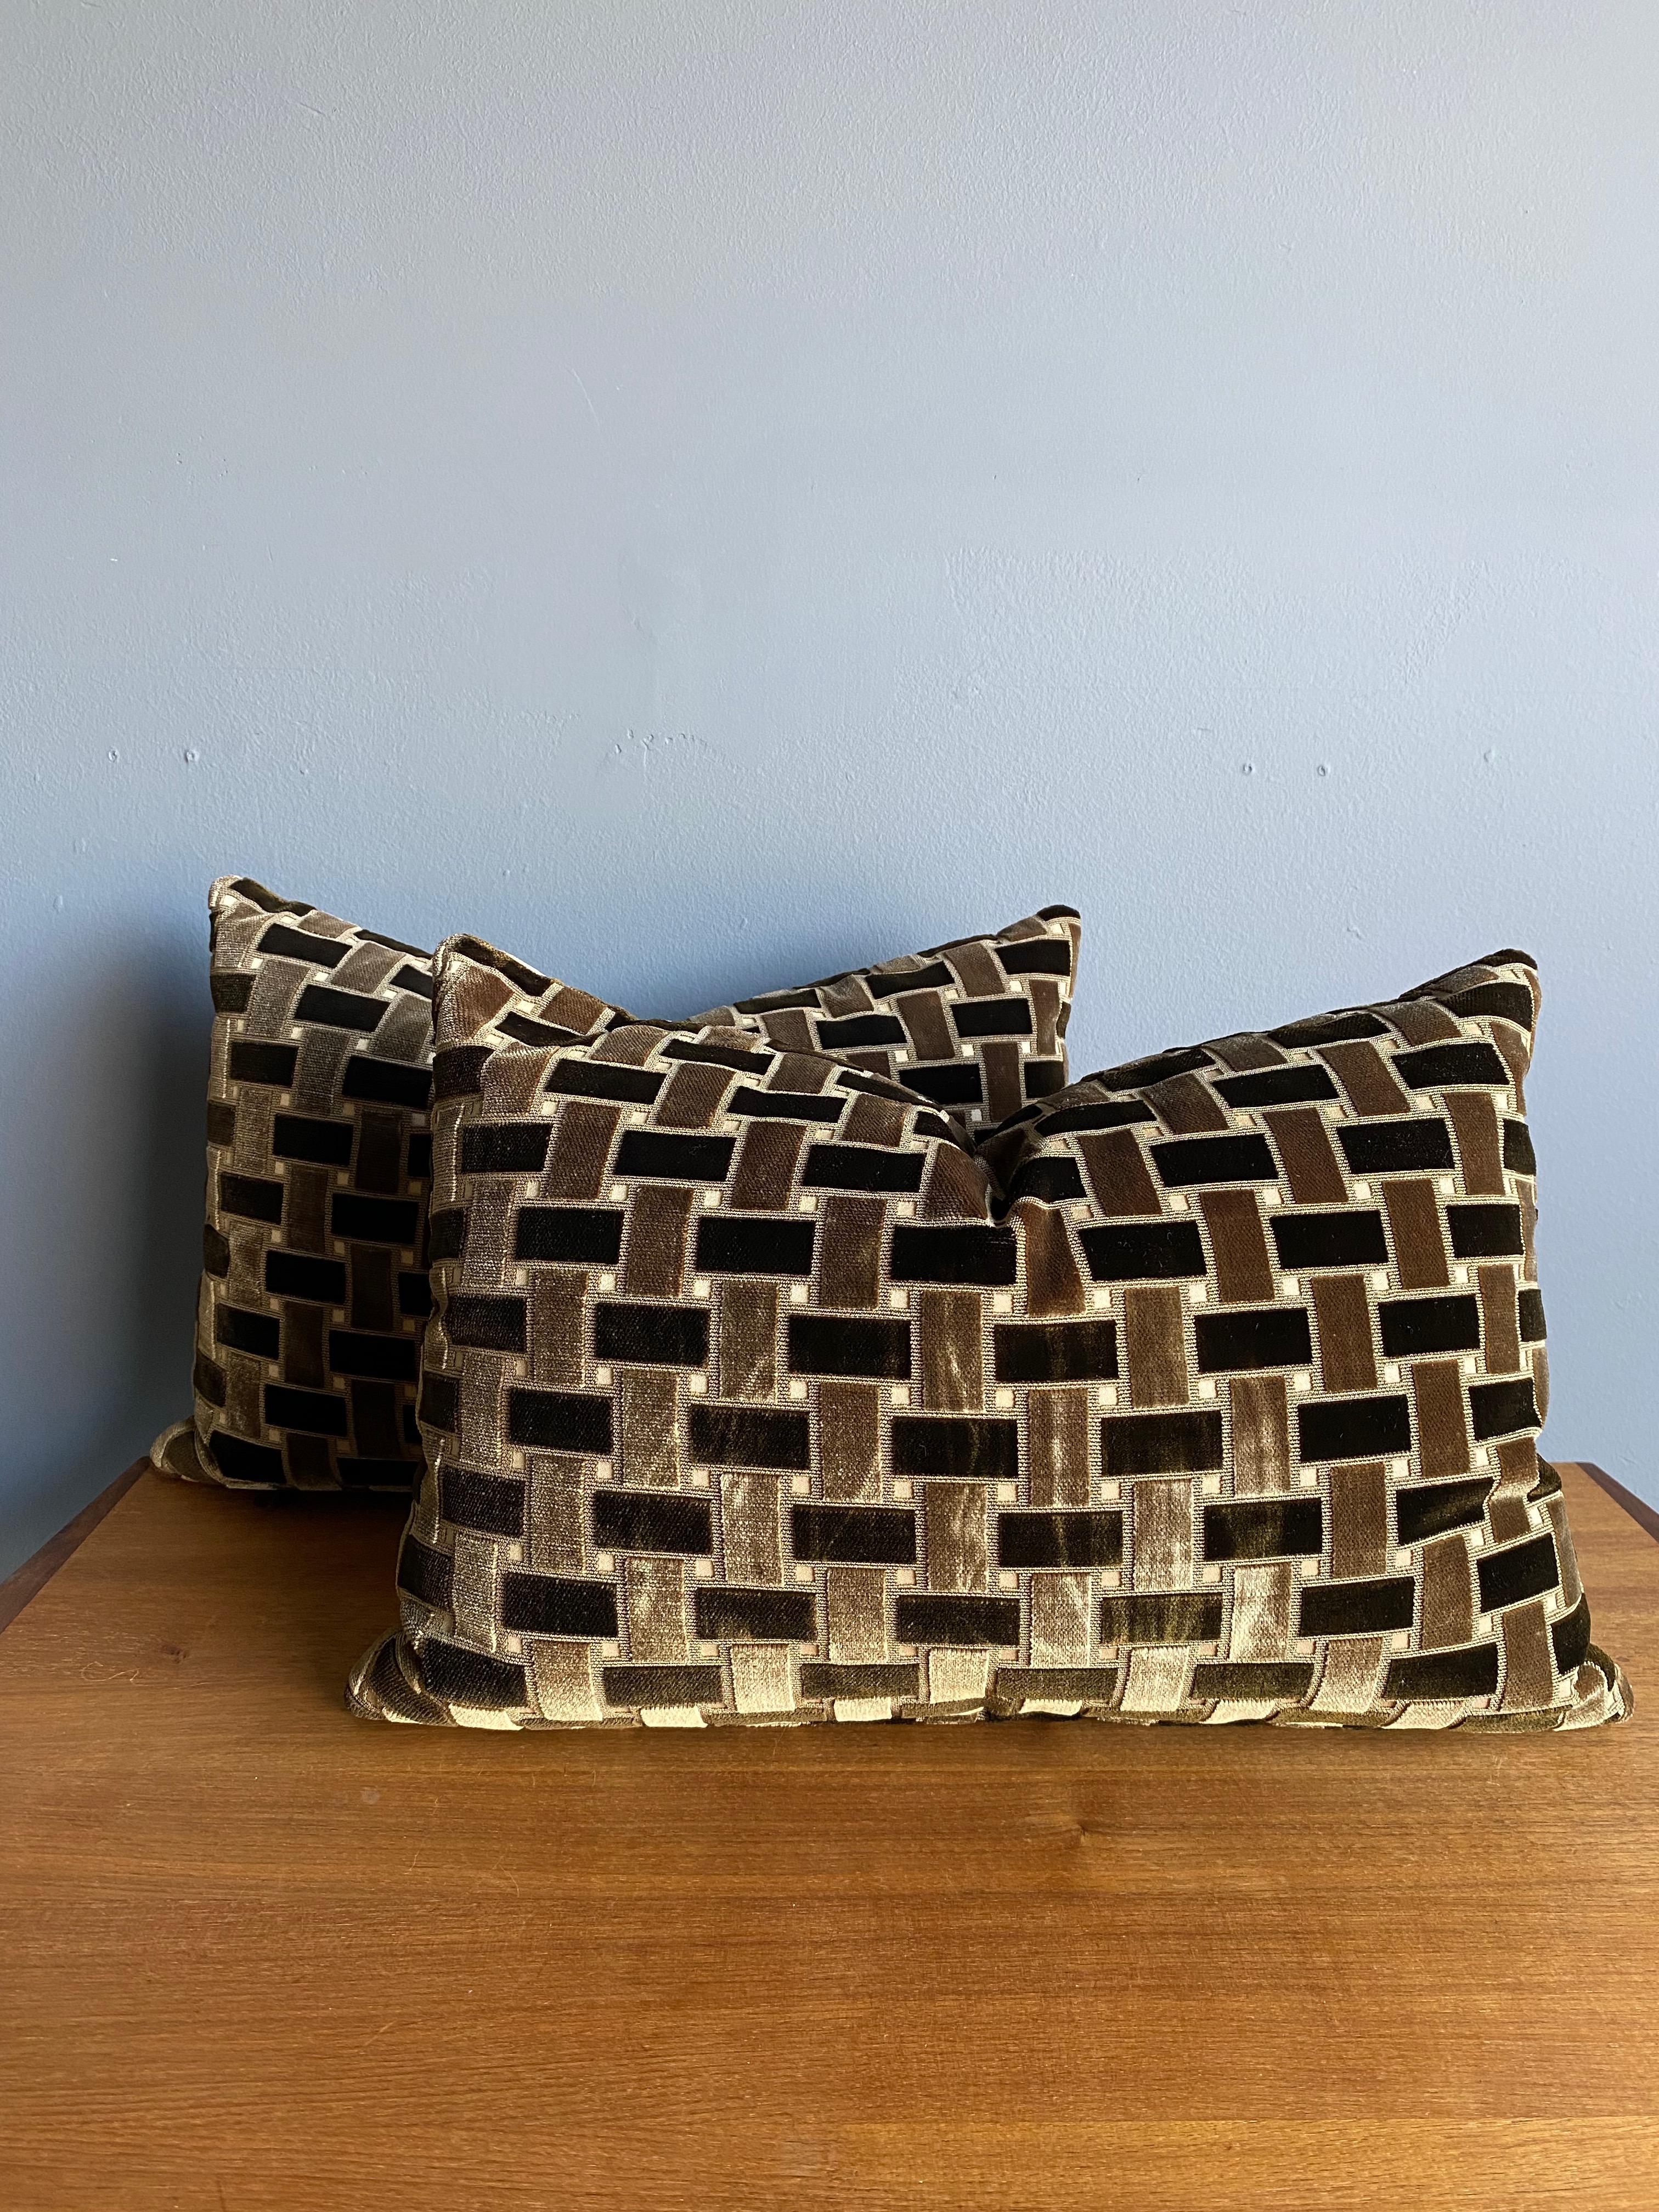 Decorative down fill pillows by Donghia.